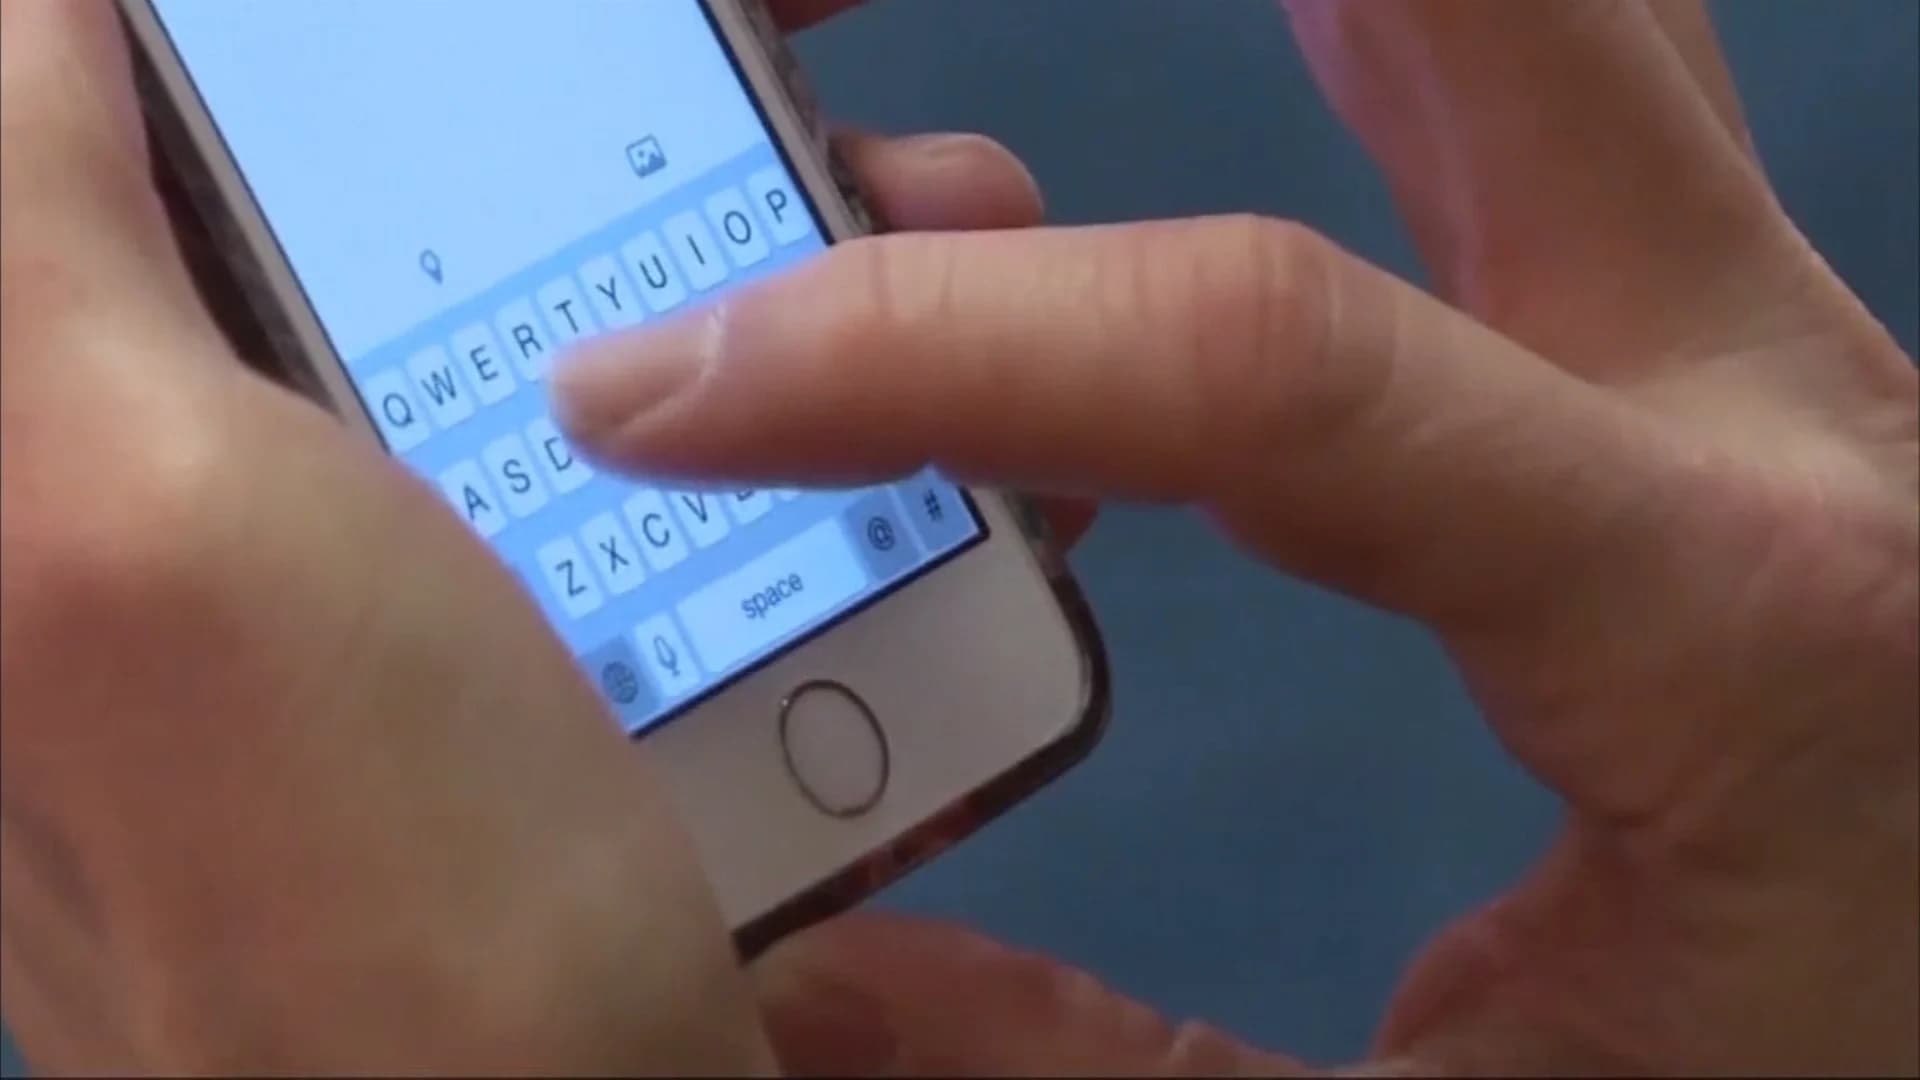 Texting tax? California mulls texting fee to help the poor